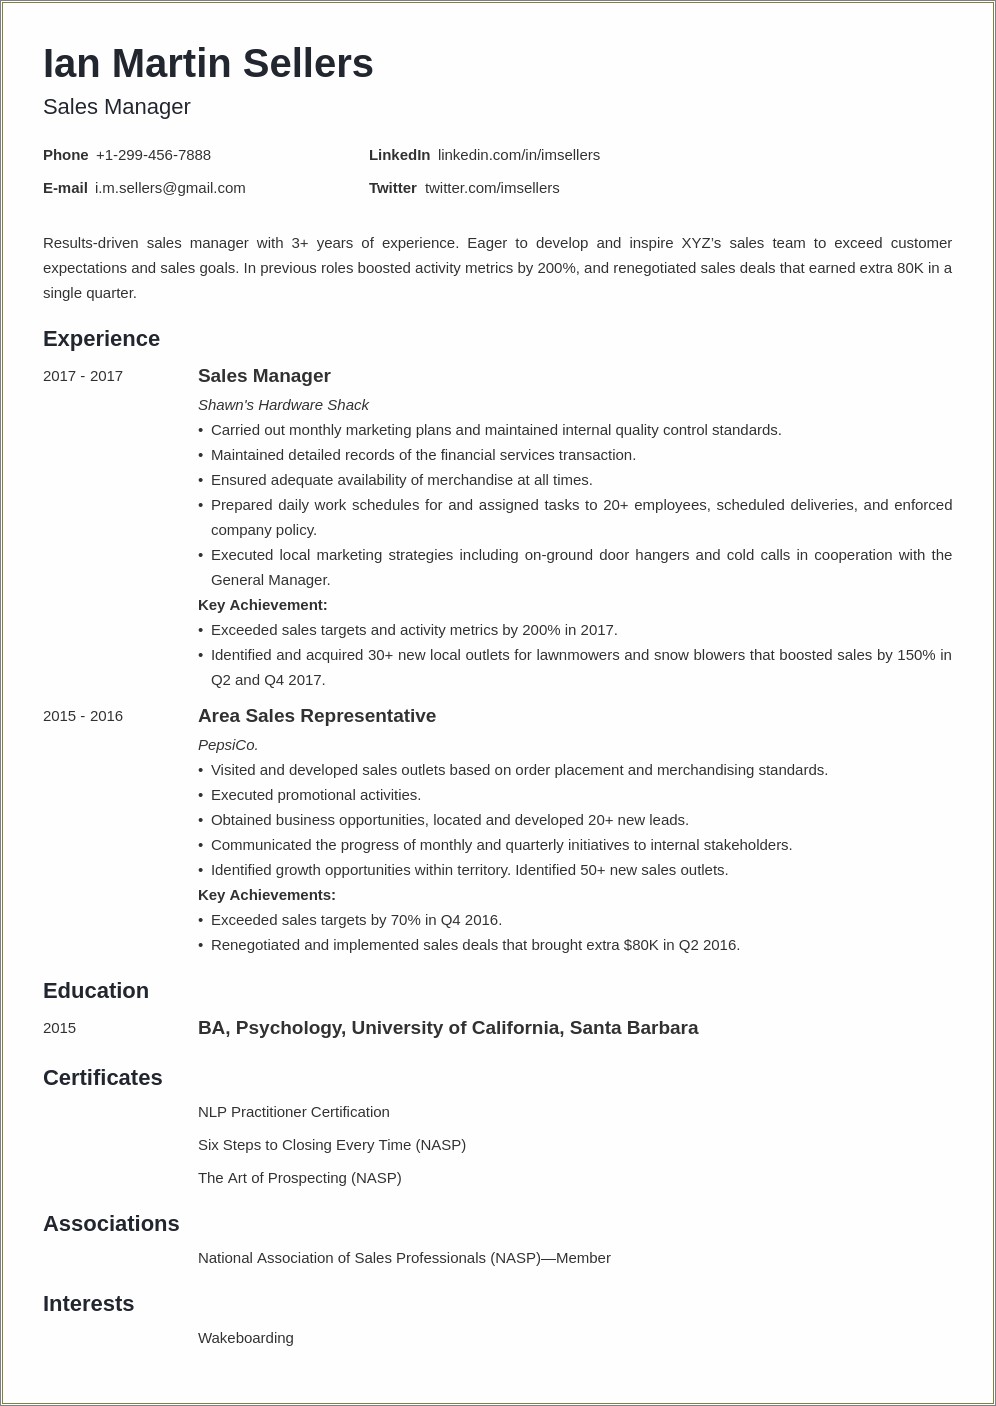 Resume With Point Of Sales Experience